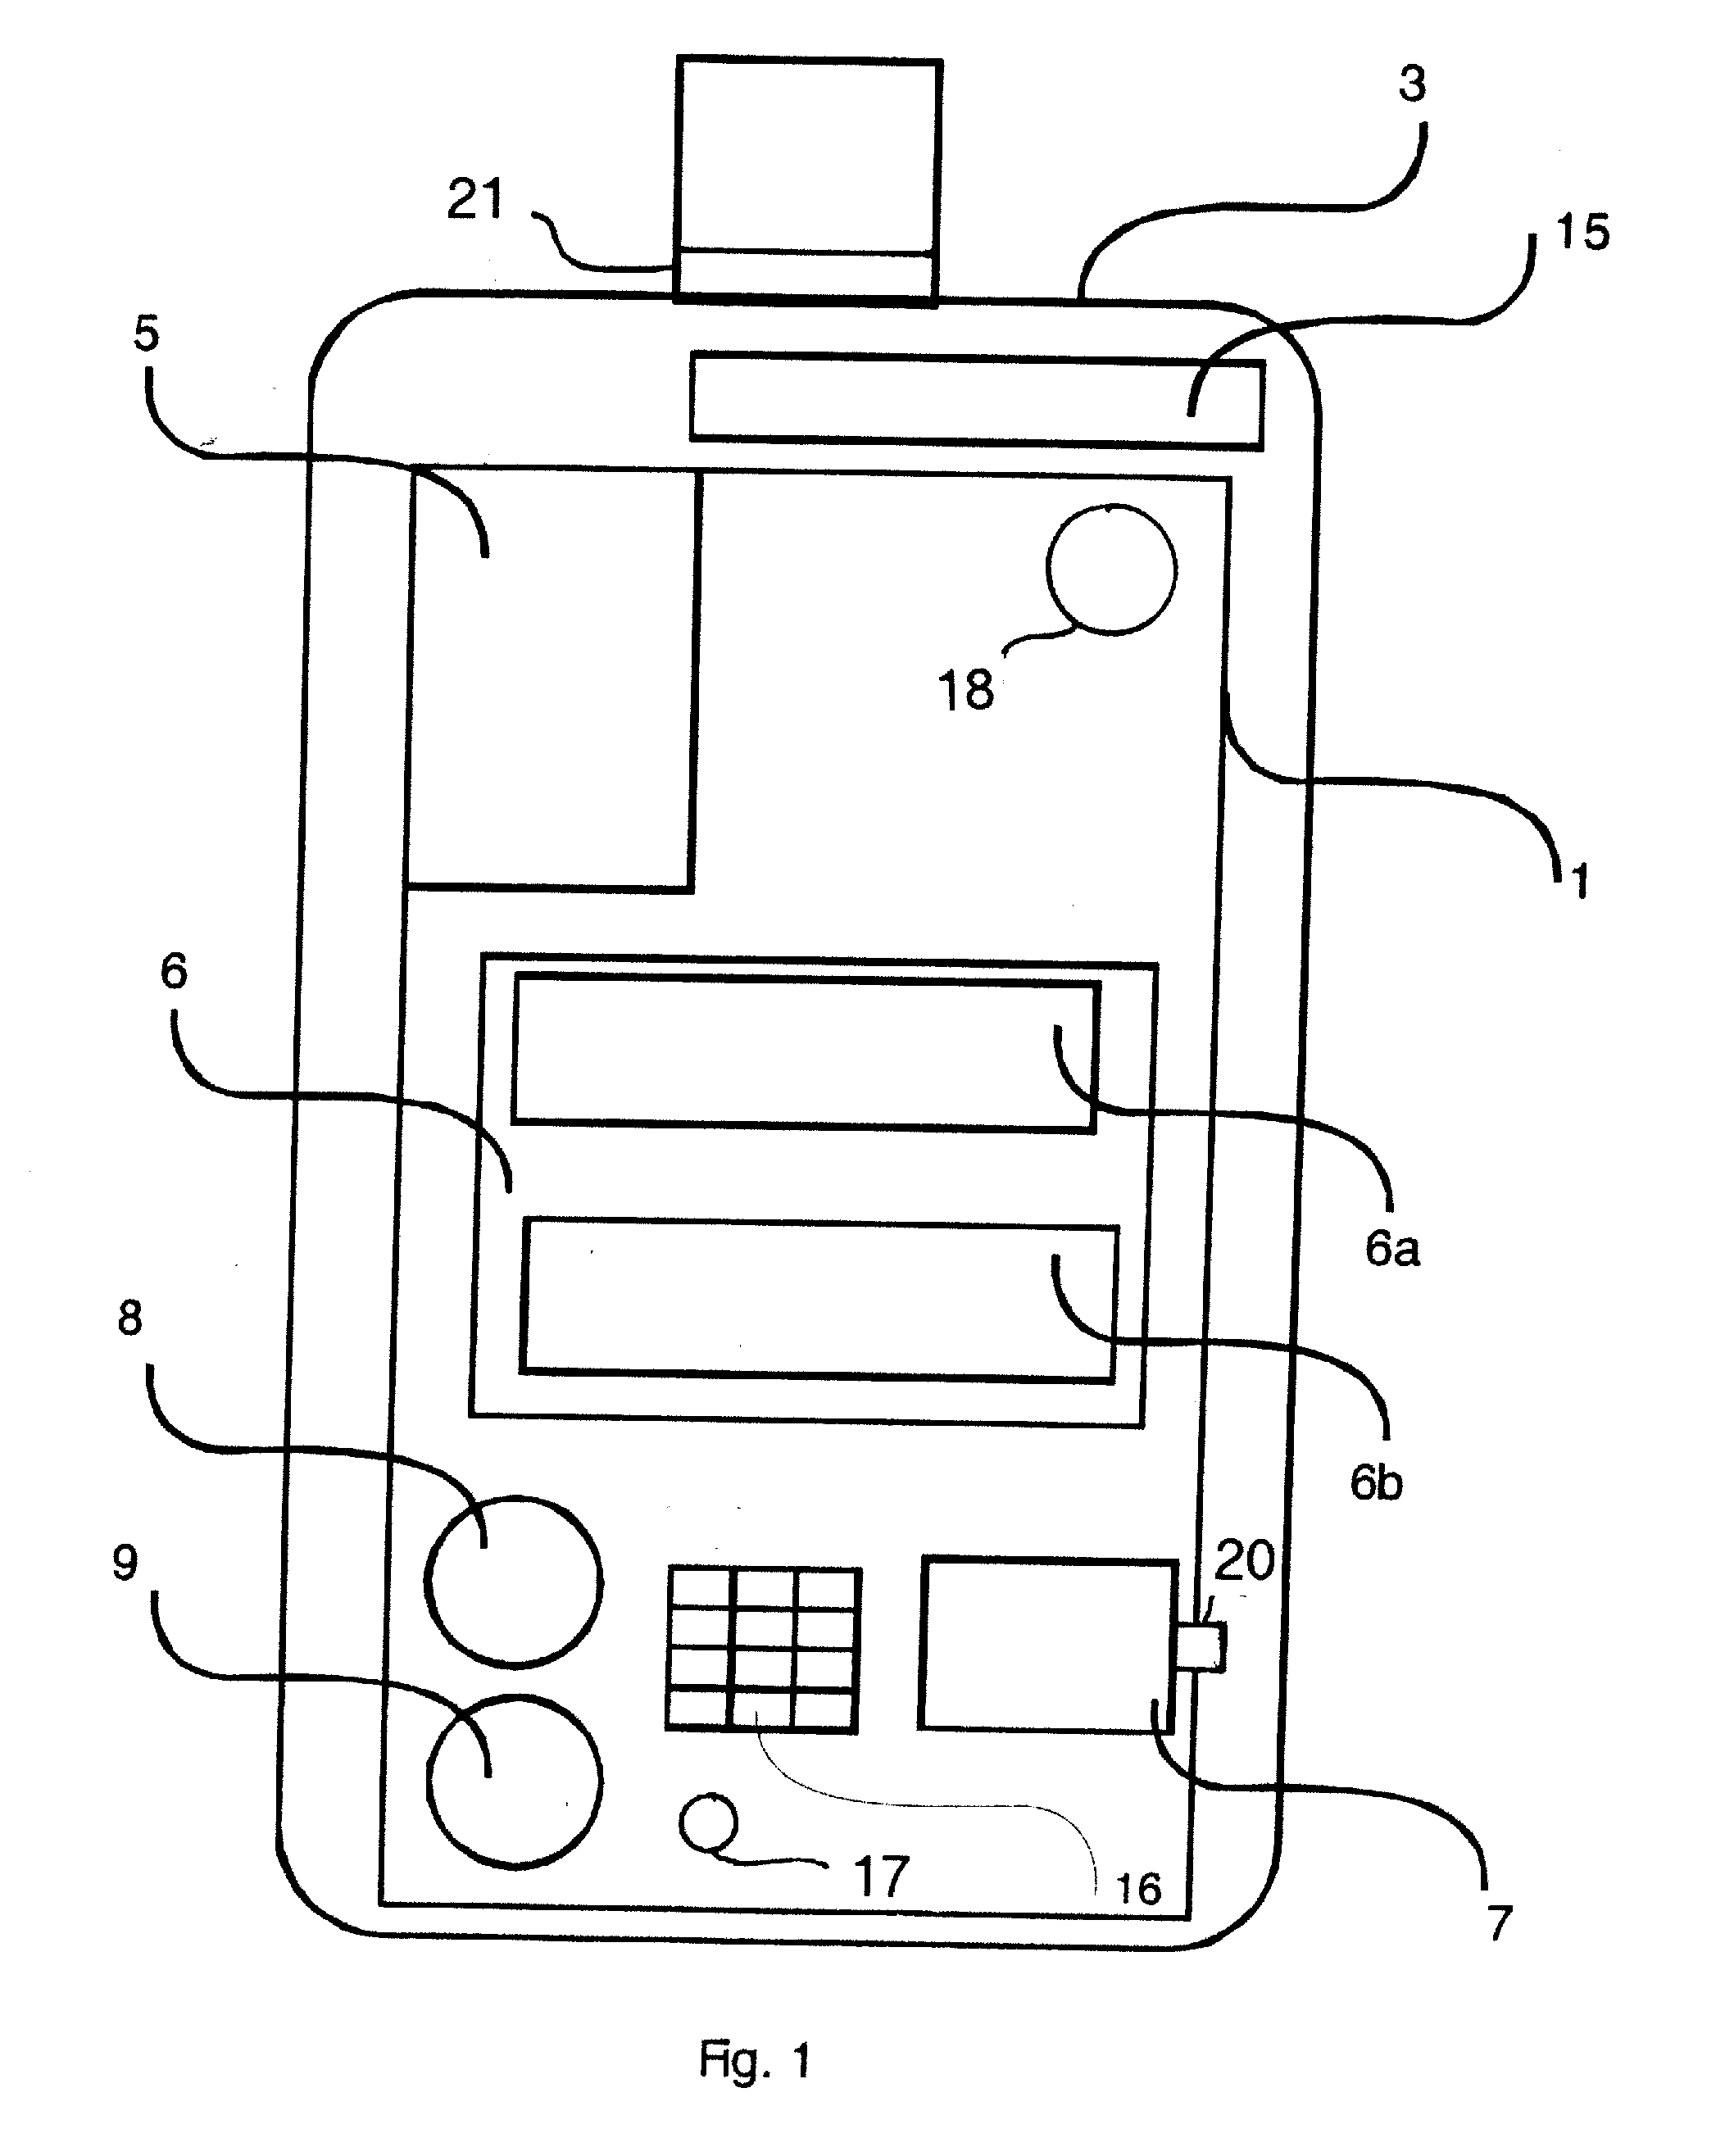 Packaged product having a reactive label and a method of its use